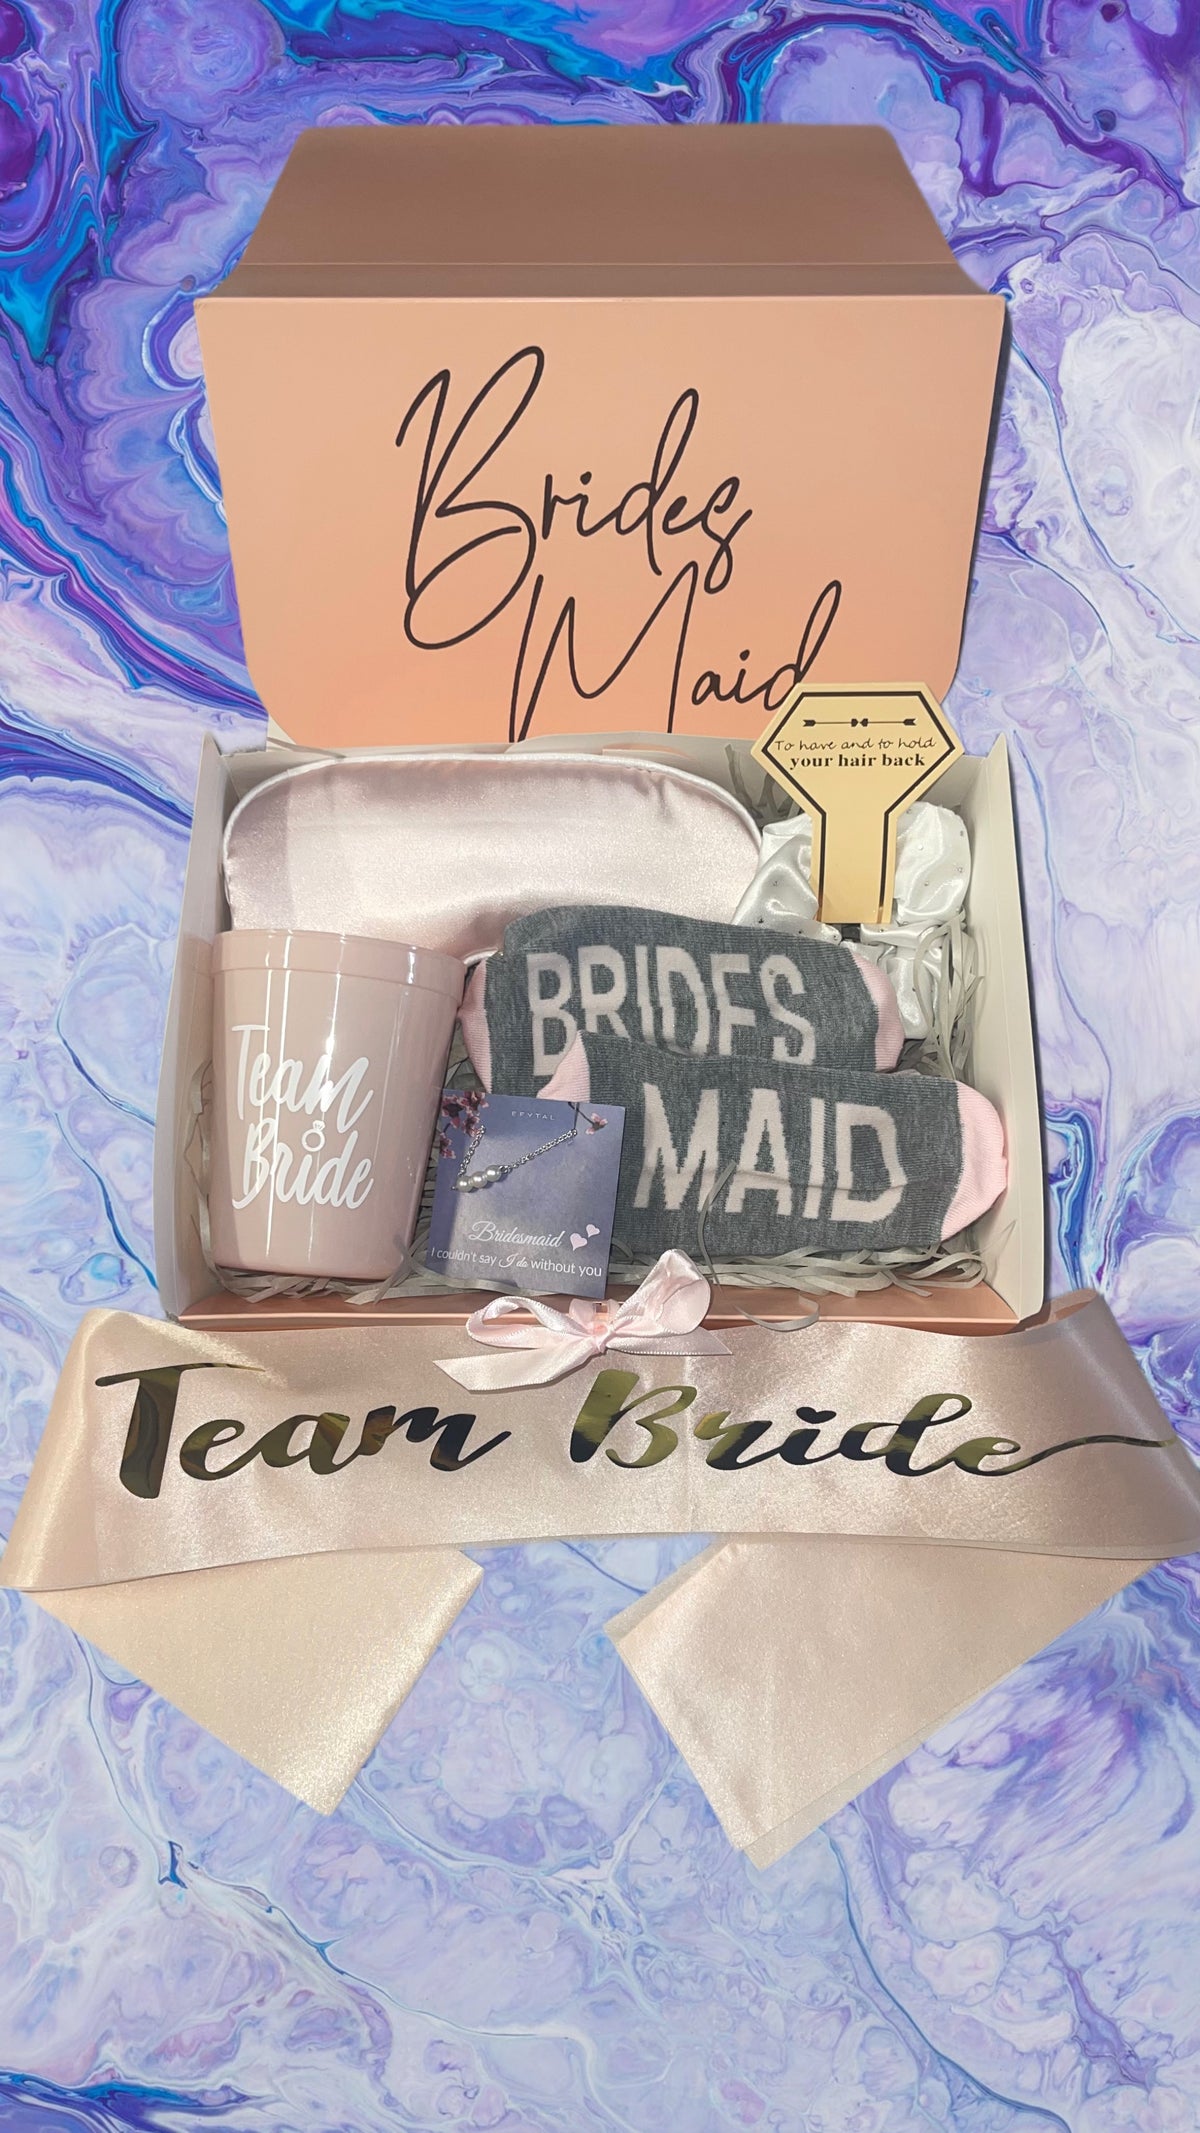 a bride's maid gift box on a marble background